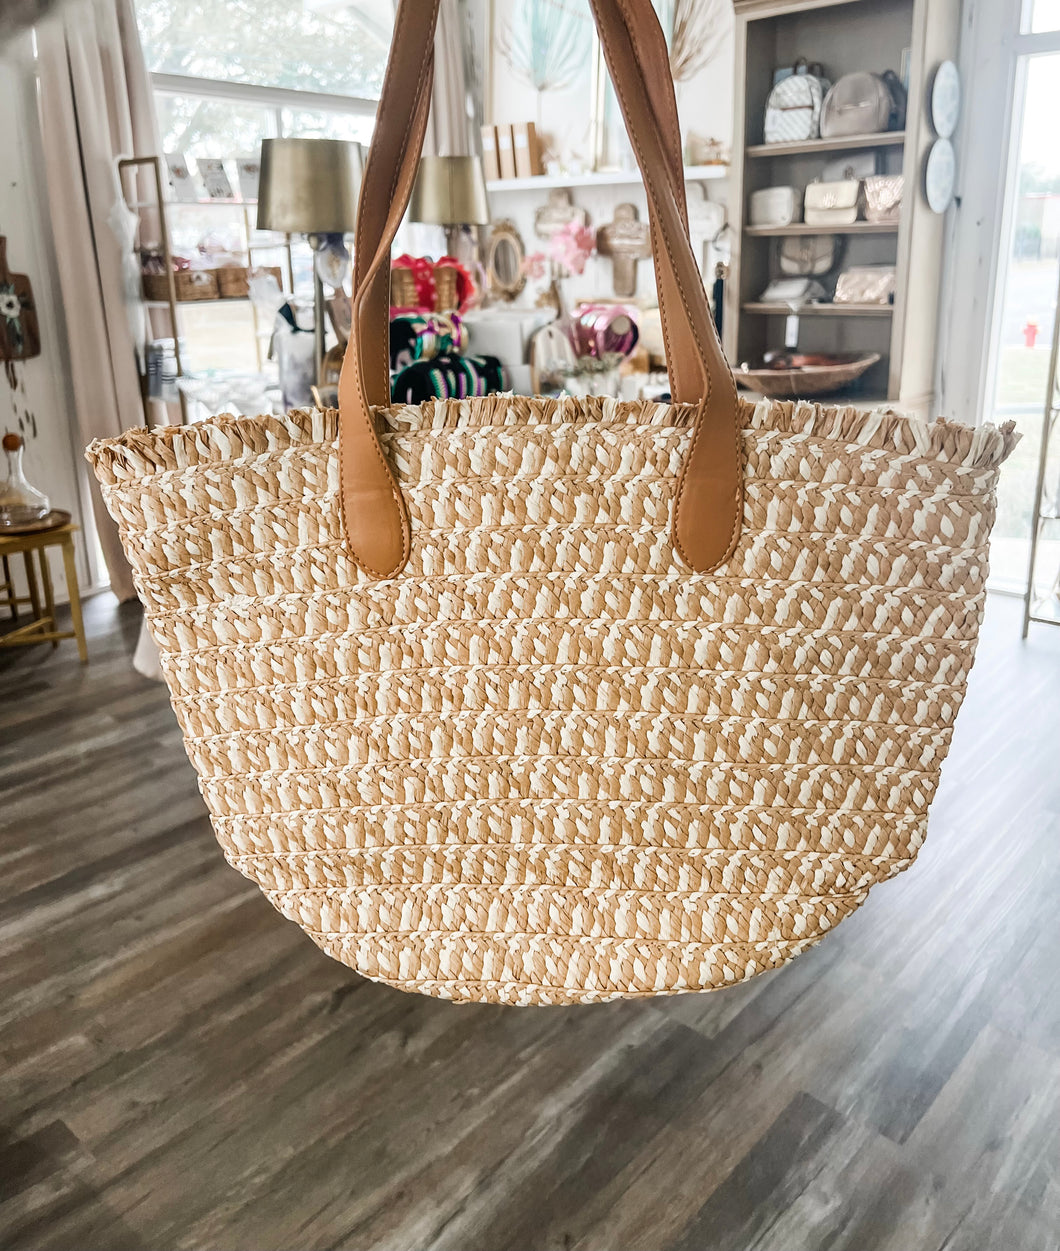 Netherland Straw Tote- Anna Laura’s Boutique by Goldie